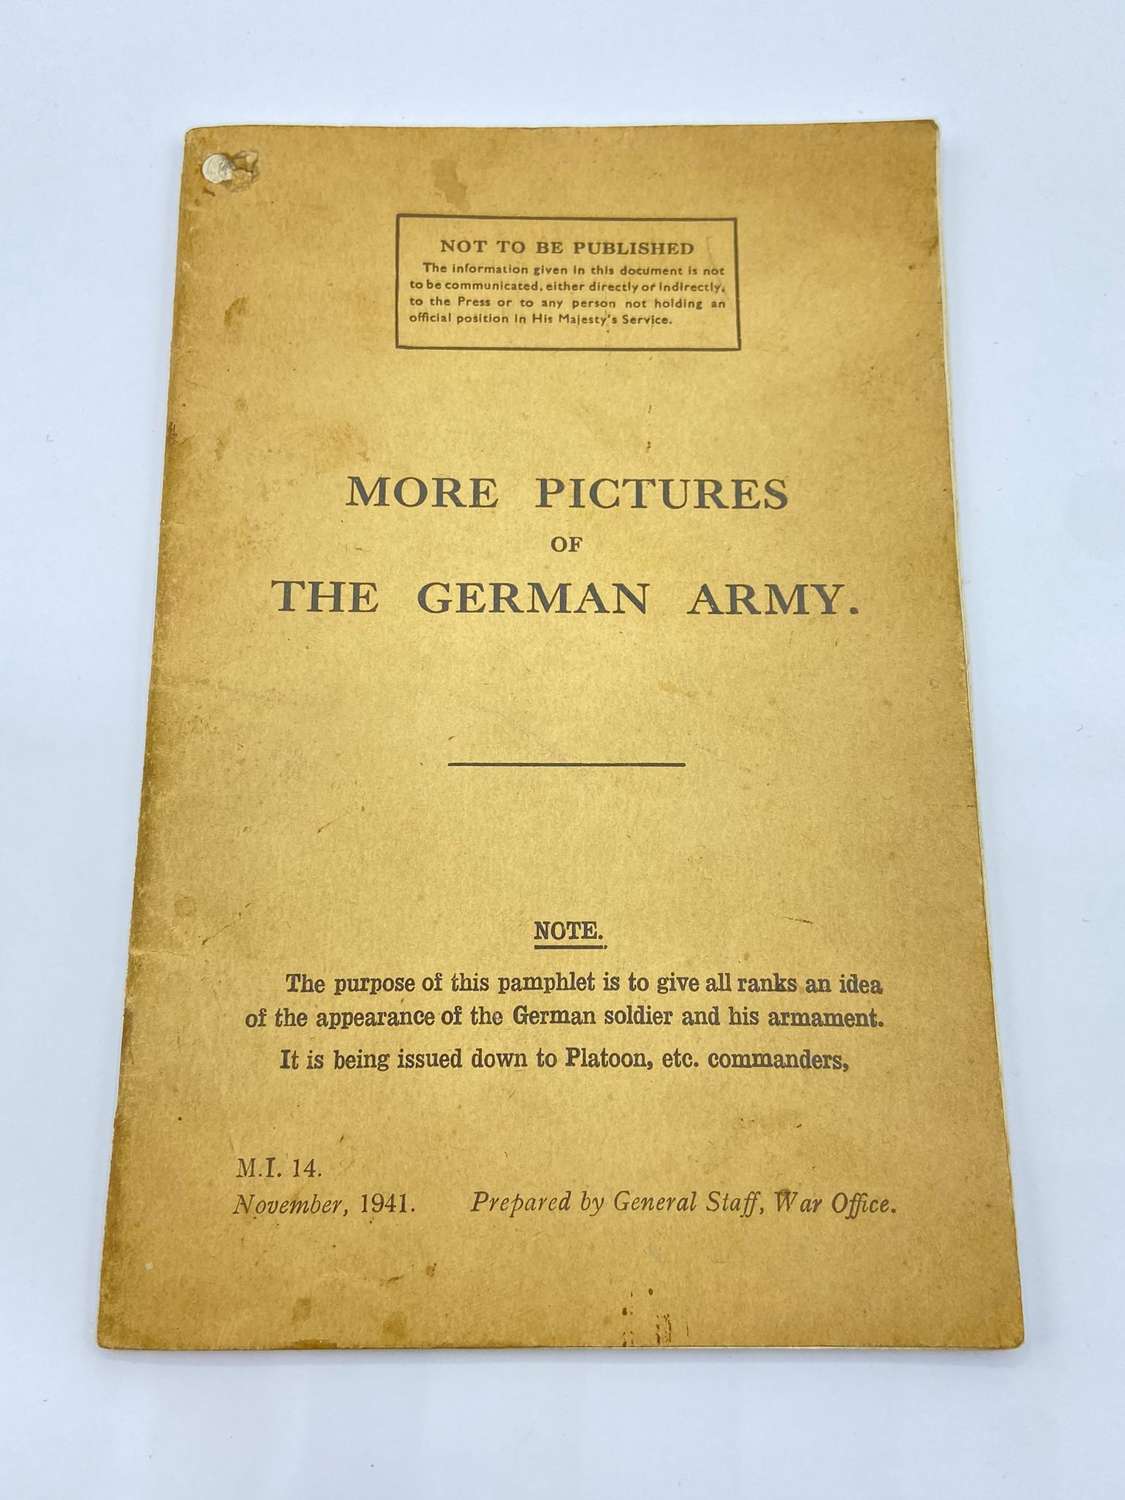 WW2 British Army More Pictures Of The German Army Publication